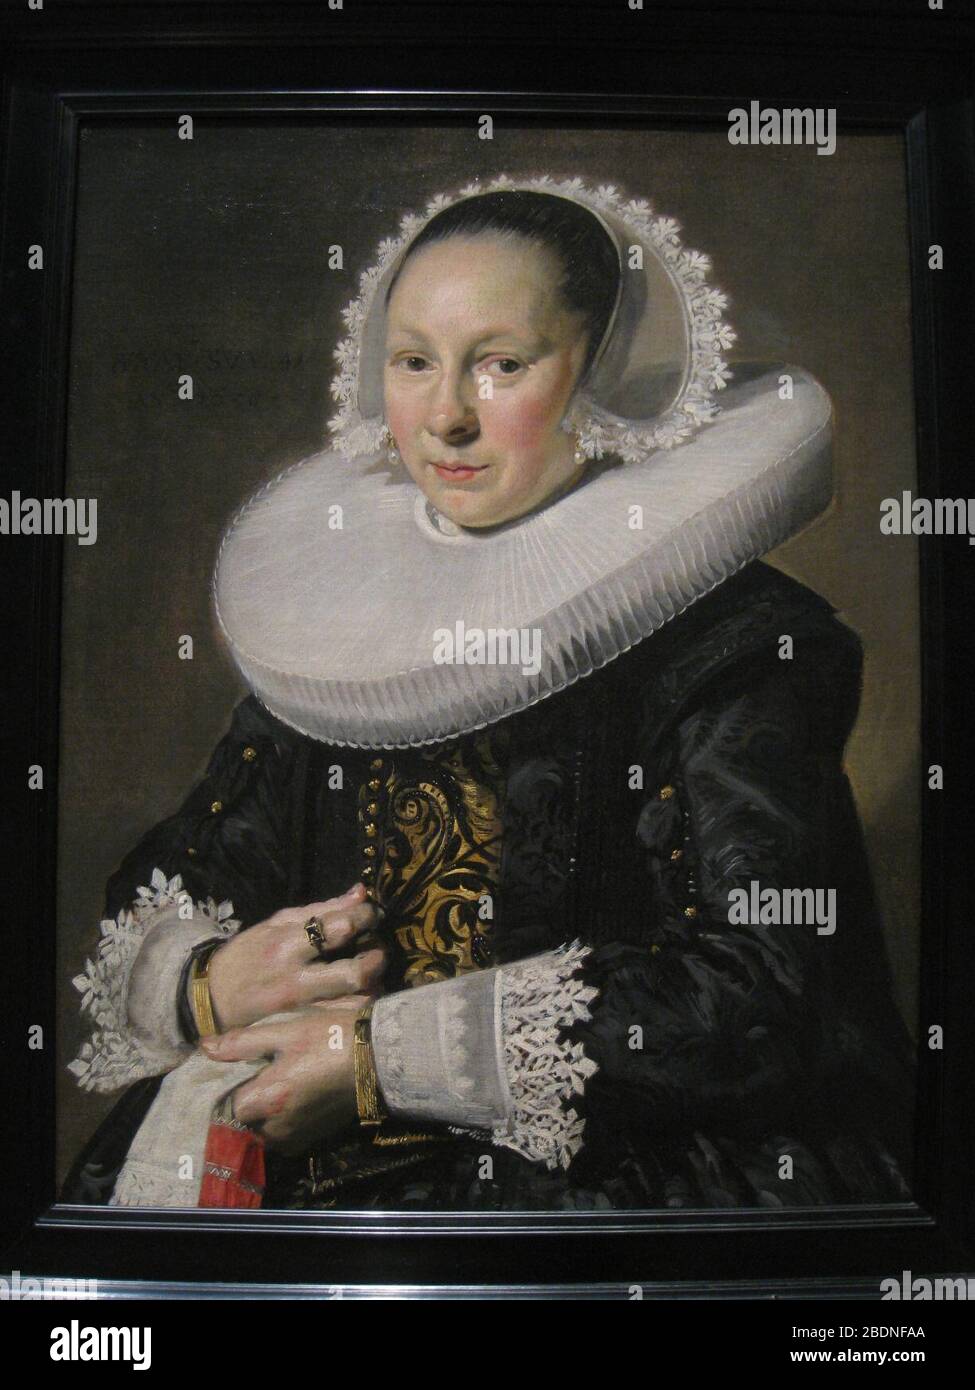 Portrait of a Woman by Frans Hals. Stock Photo